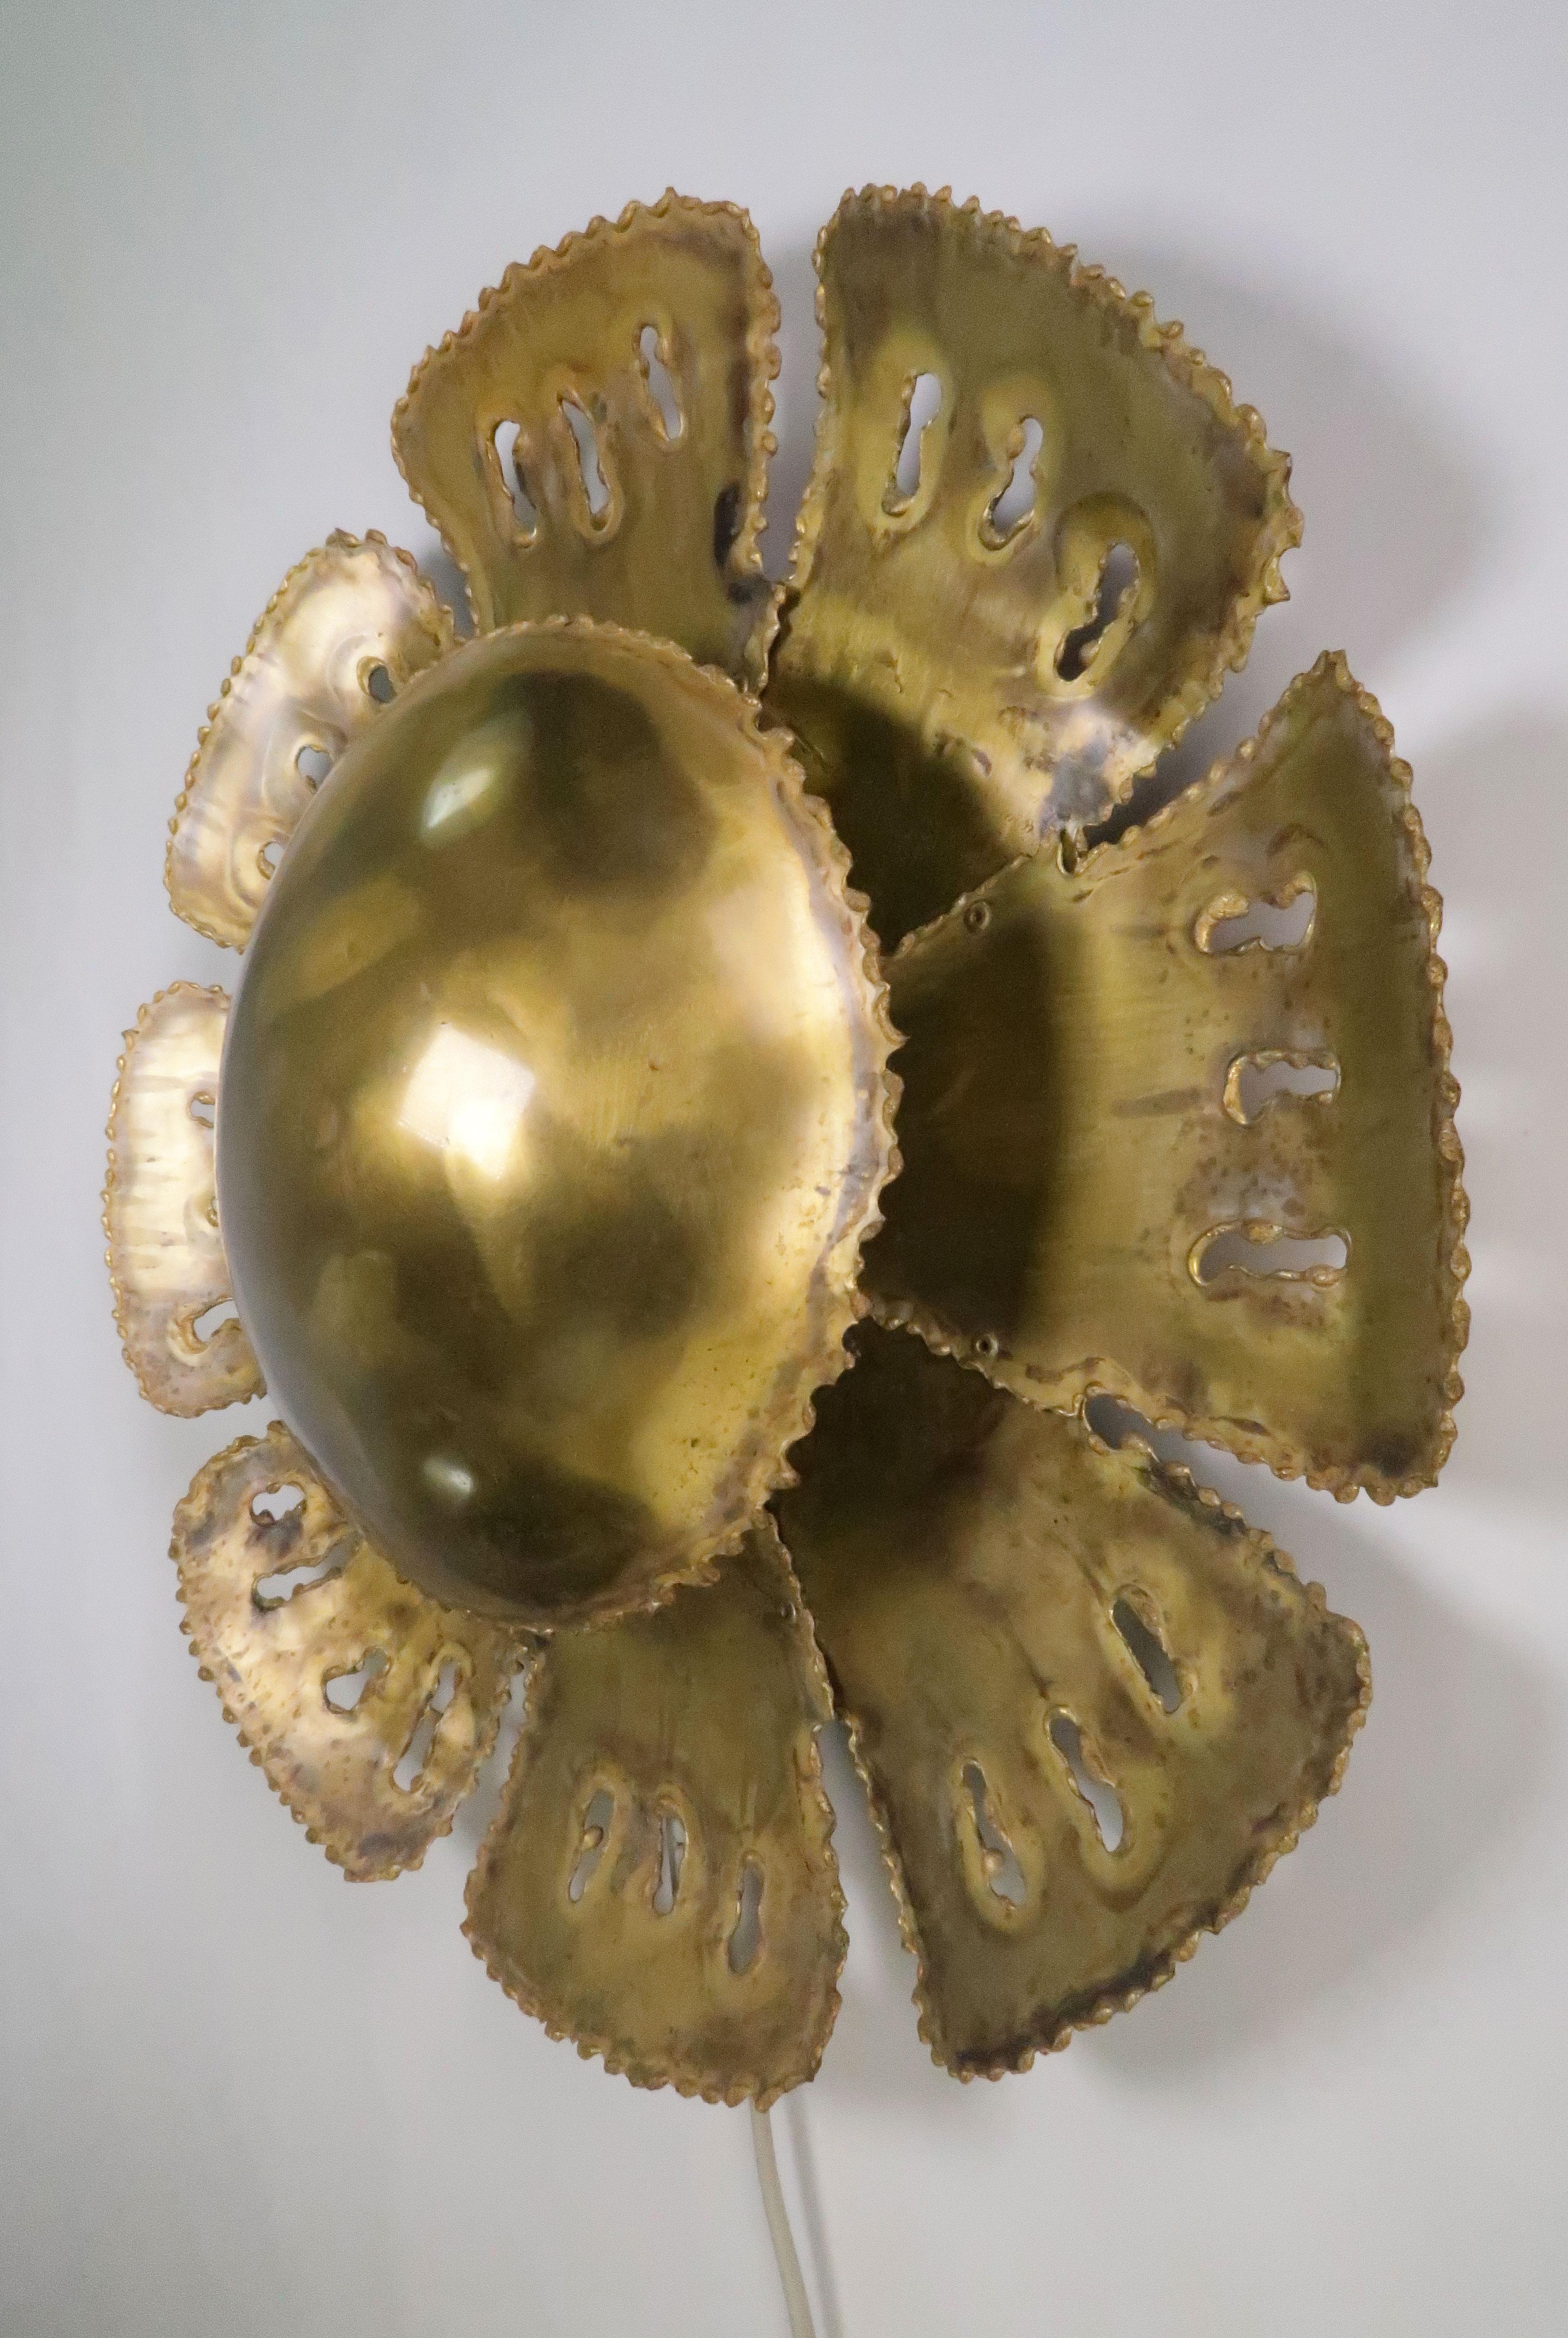 Danish mid-century modern brutalist rustic brass wall light in the shape of a large flower with eight leaves surrounding a big round shiny center. Designed by the versatile Dane Svend Aage Holm Sørensen for his own company Holm Sørensen & Co. in the